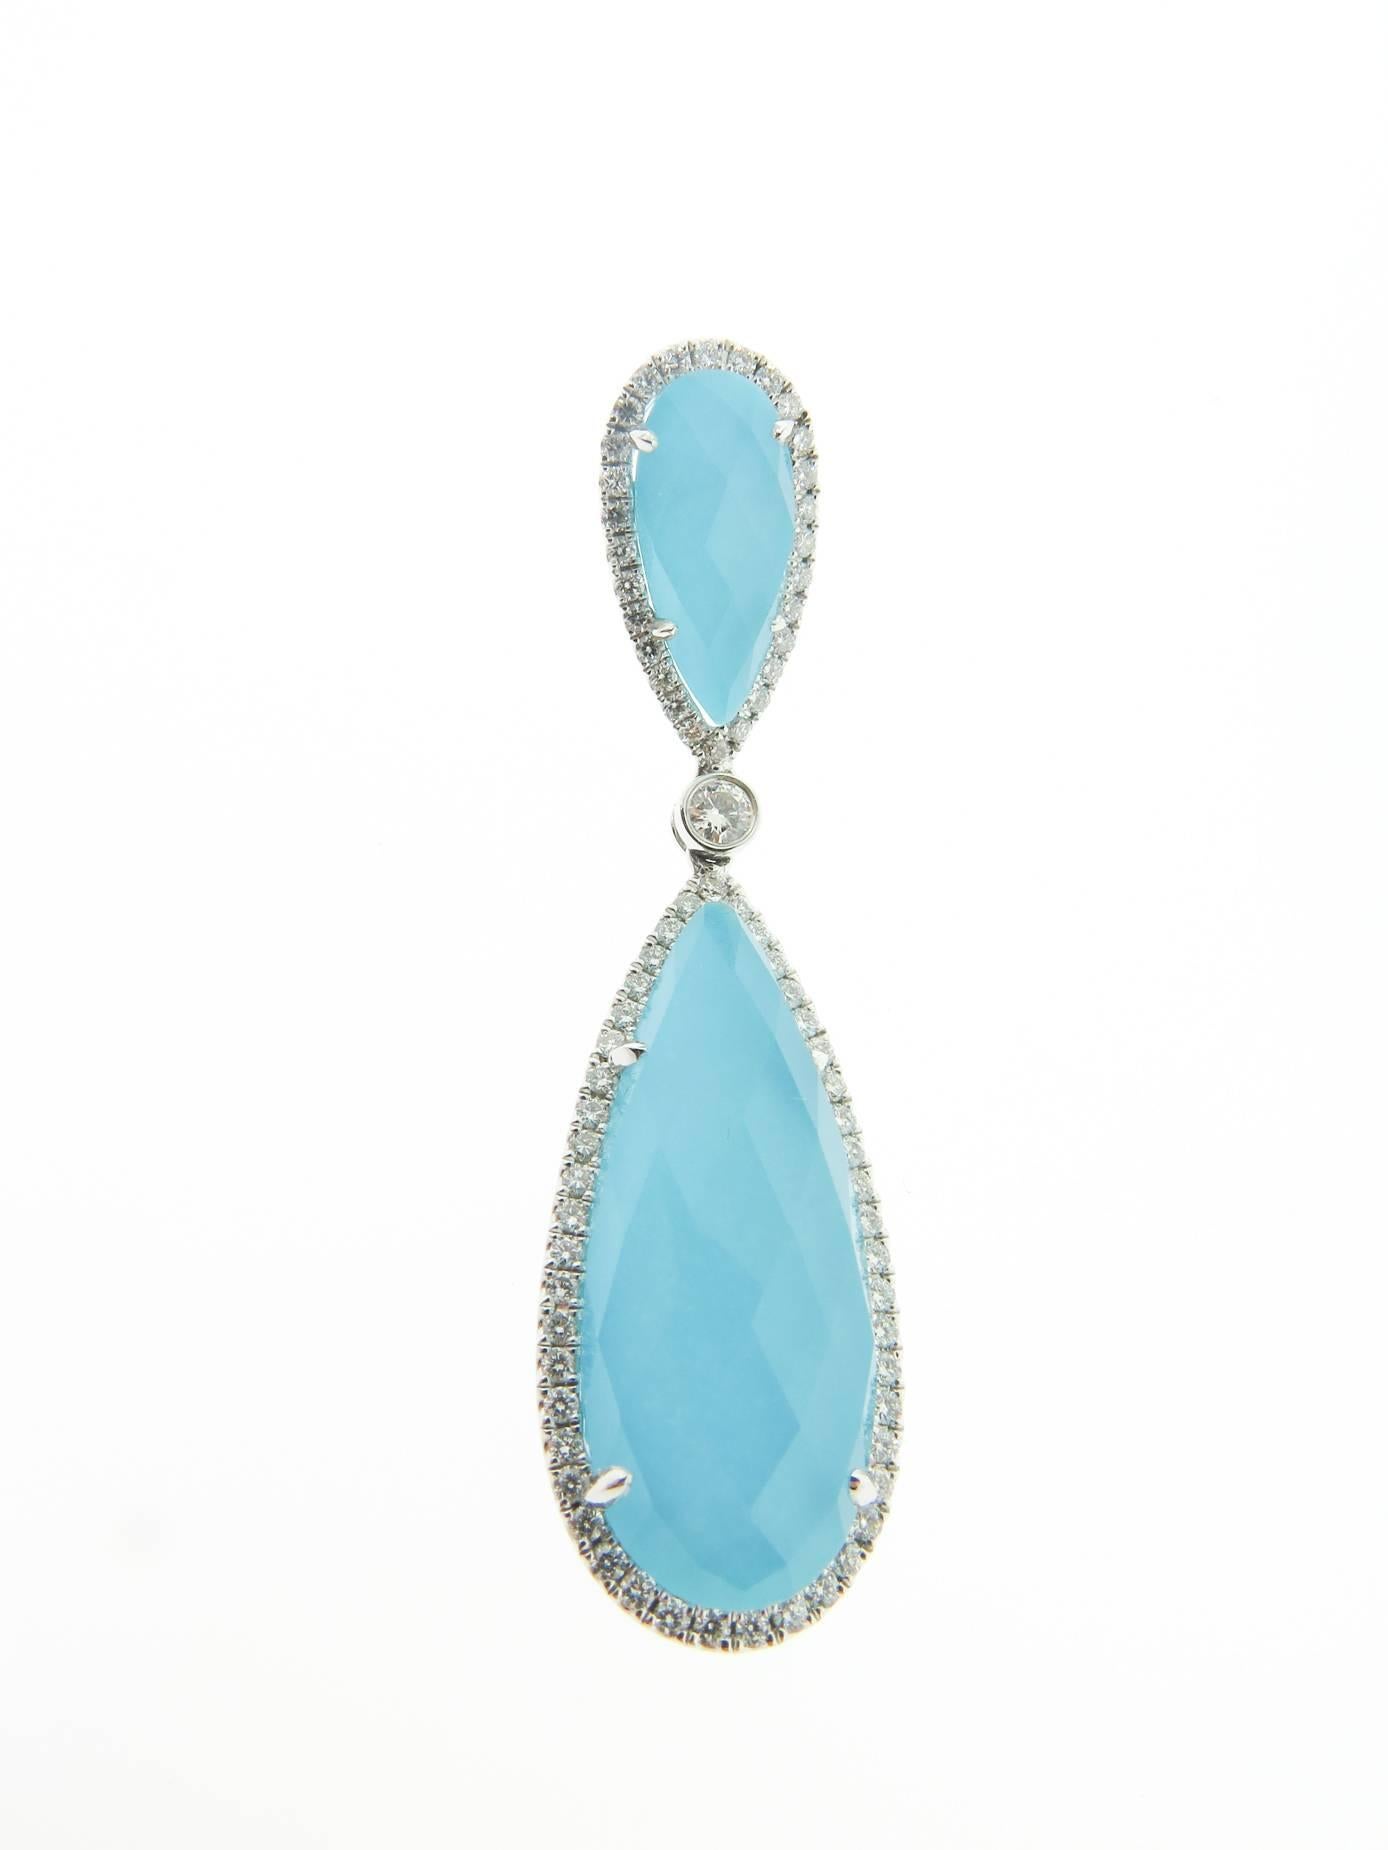 These amazing drop earrings have two pear-shaped turquoise doublets with white topaz and surrounded by dazzling prong-set diamonds in 18k white gold. 